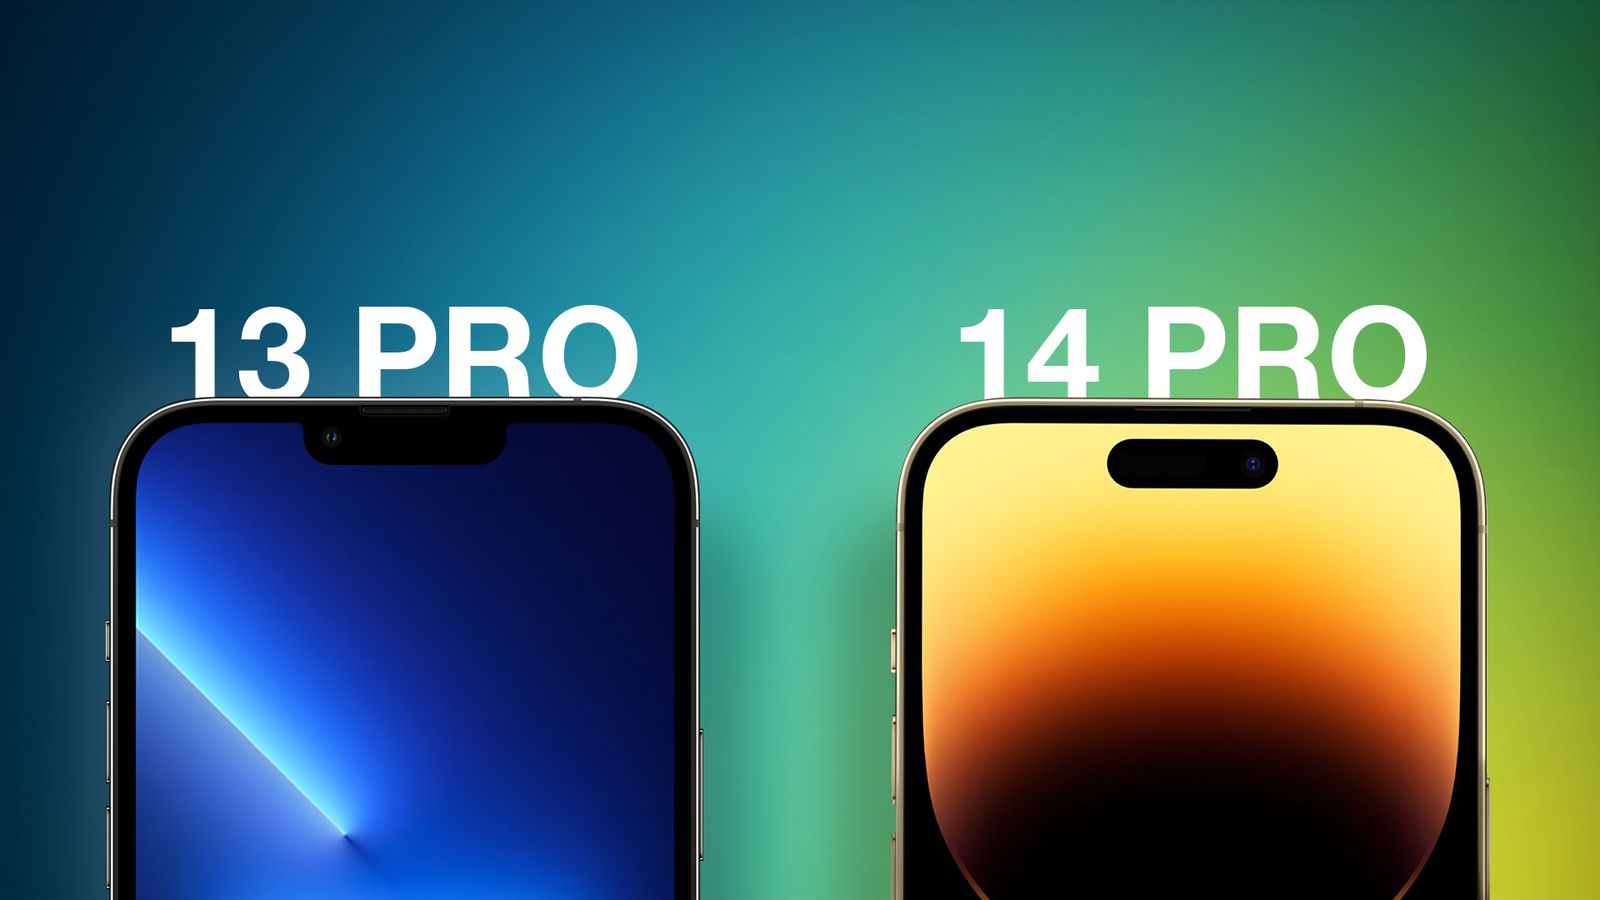 The iPhone 13 Pro and 14 Pro side-by-side